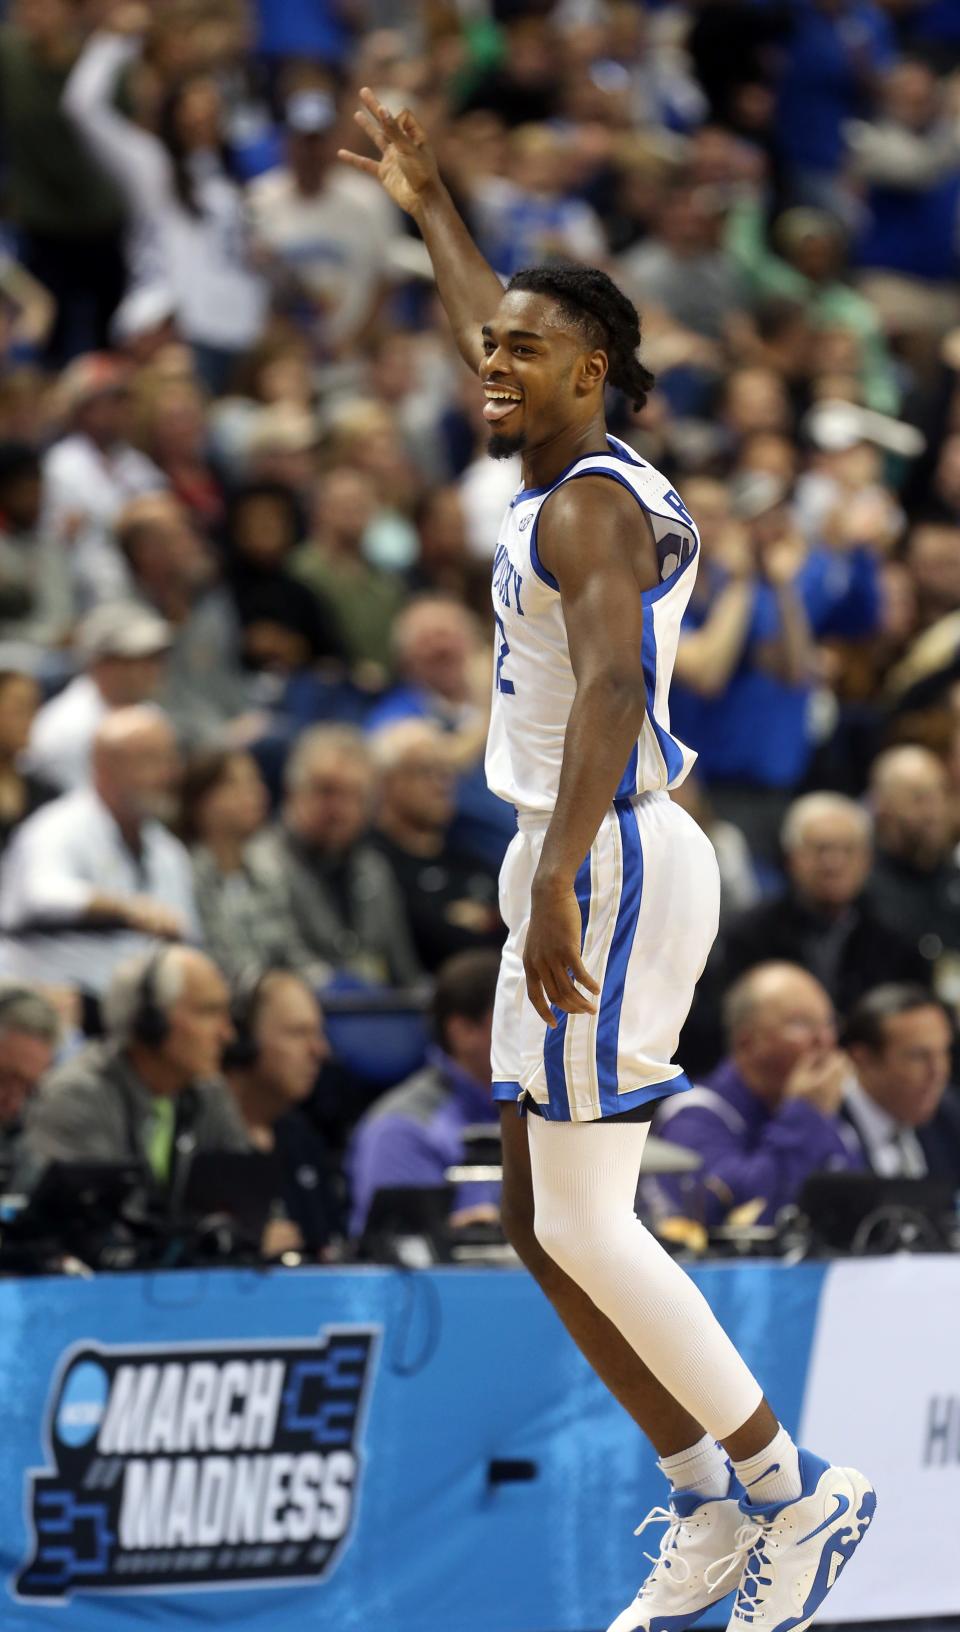 Kentucky’s Antonio Reeves will provide 3-point shooting, but who else will the Wildcats rely on?